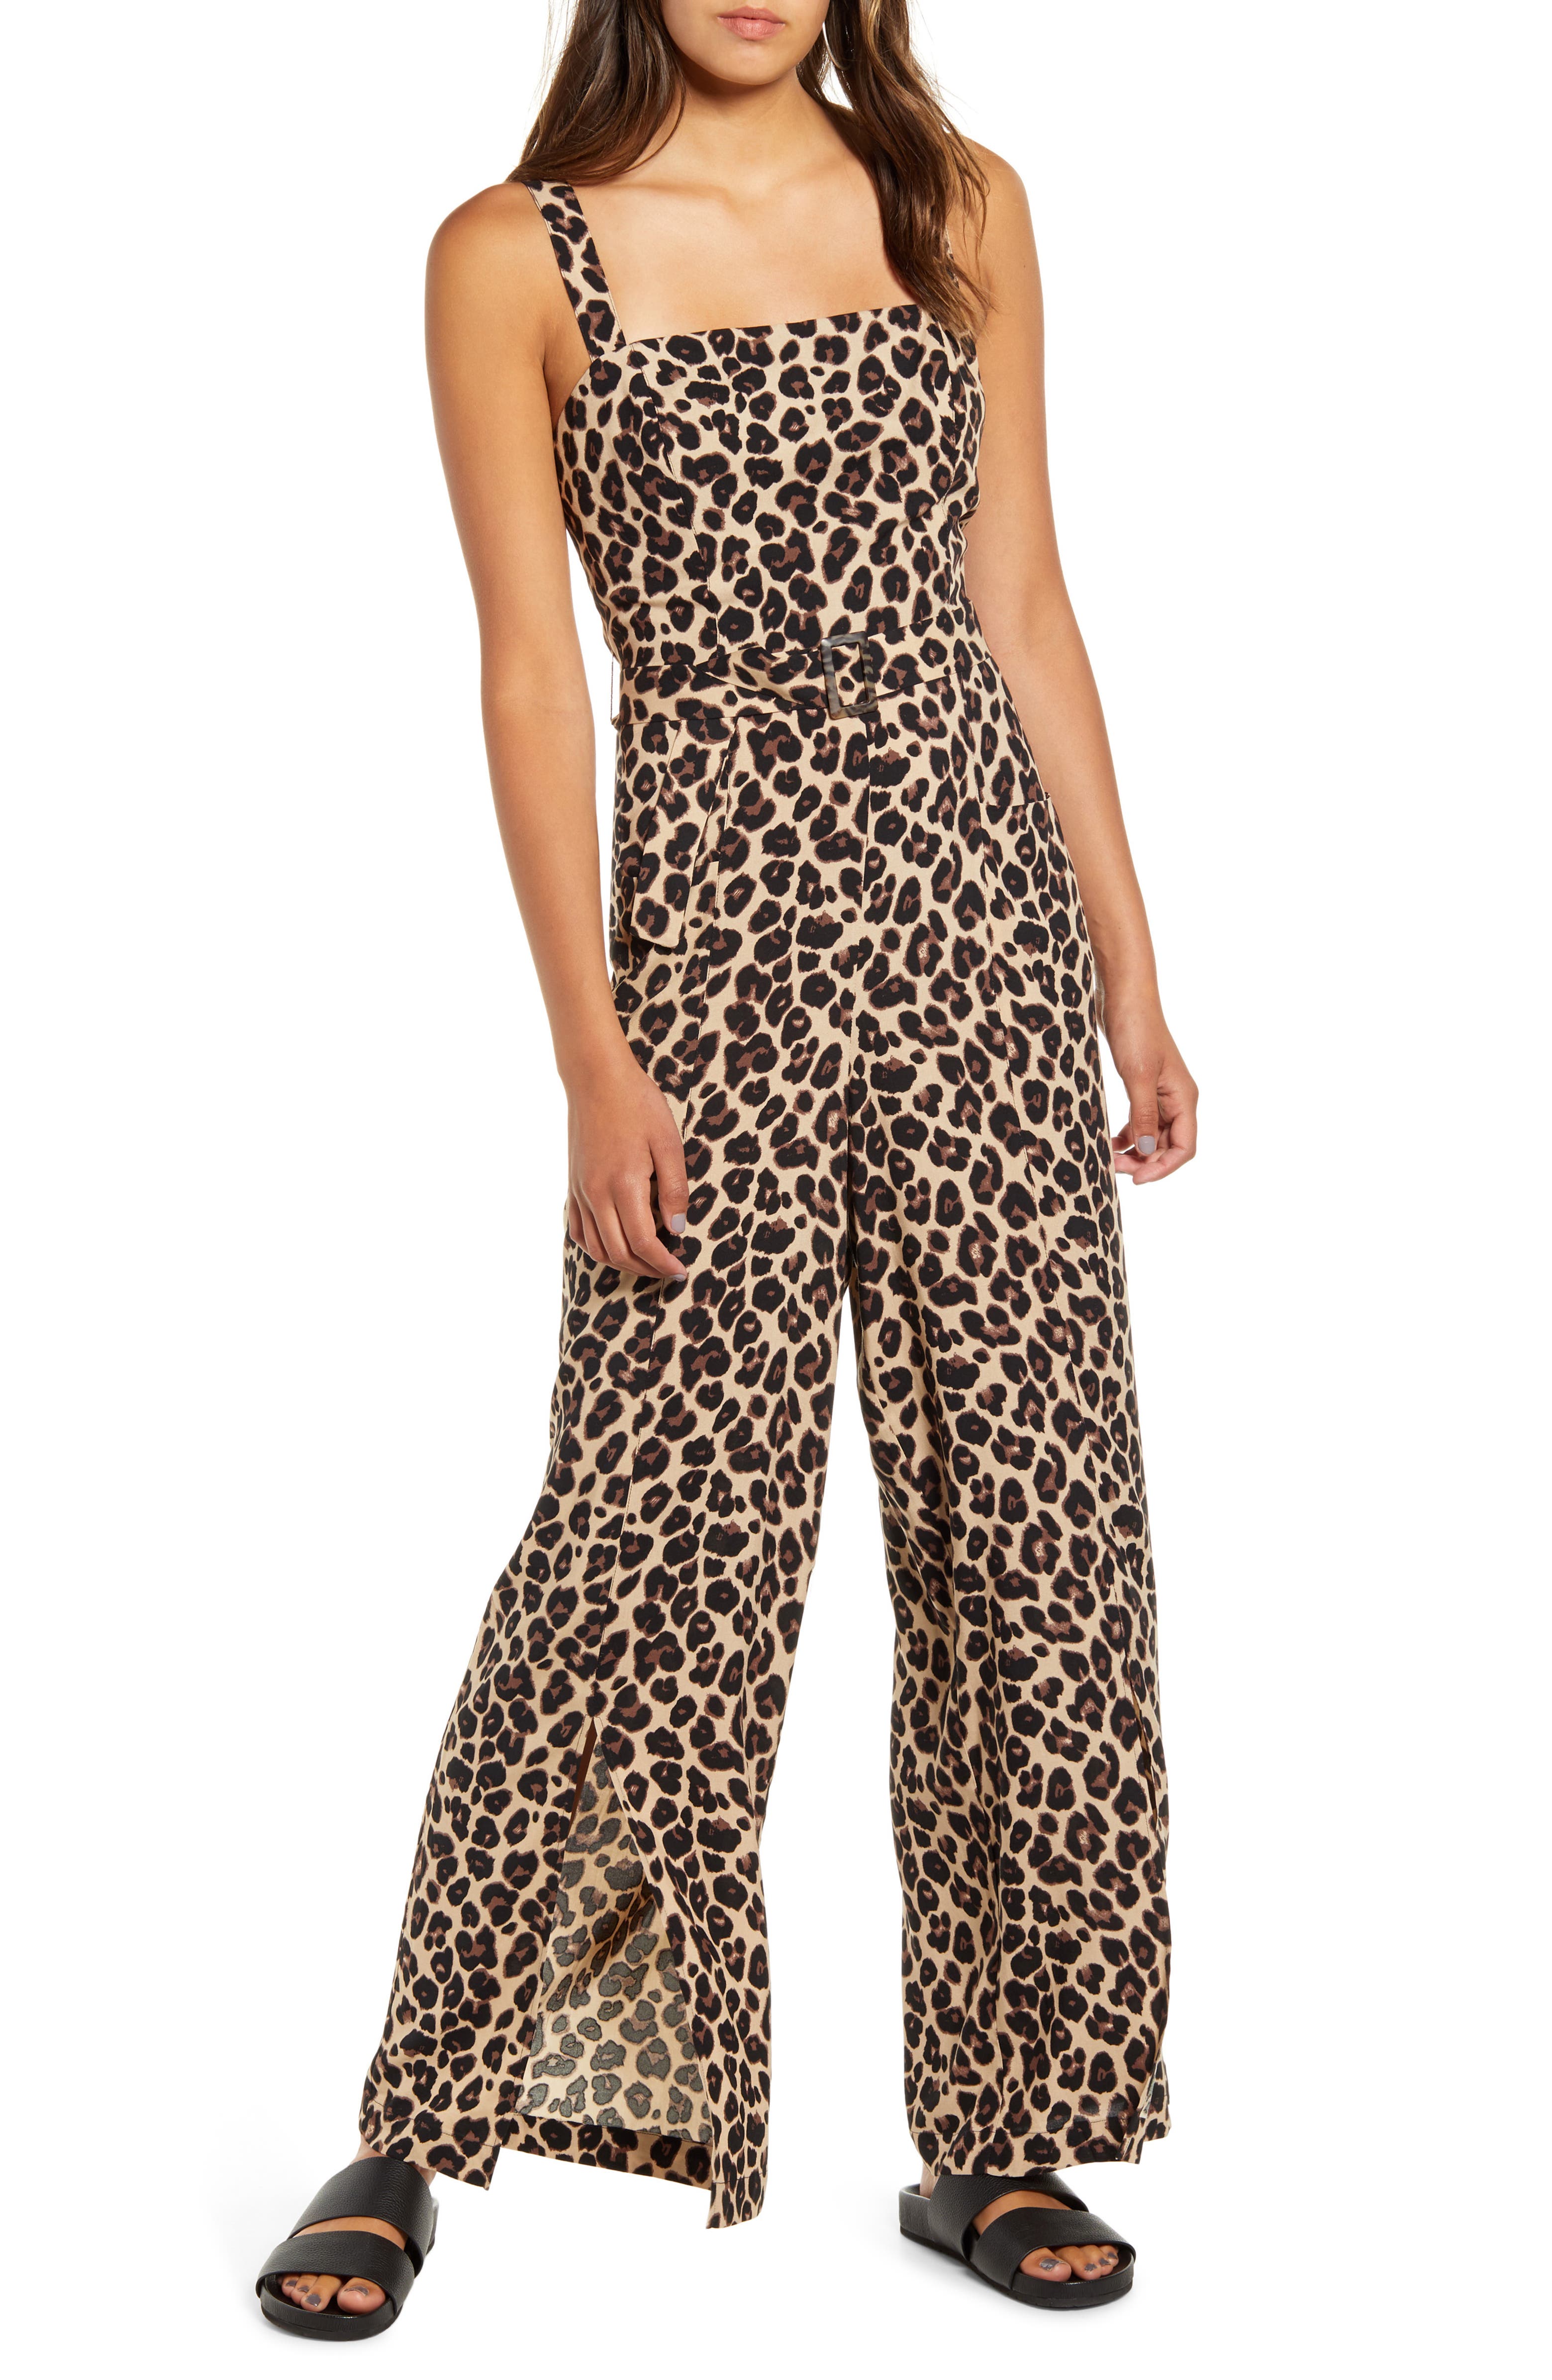 Band of Gypsies Leopard Print Belted Wide Leg Jumpsuit | Nordstrom